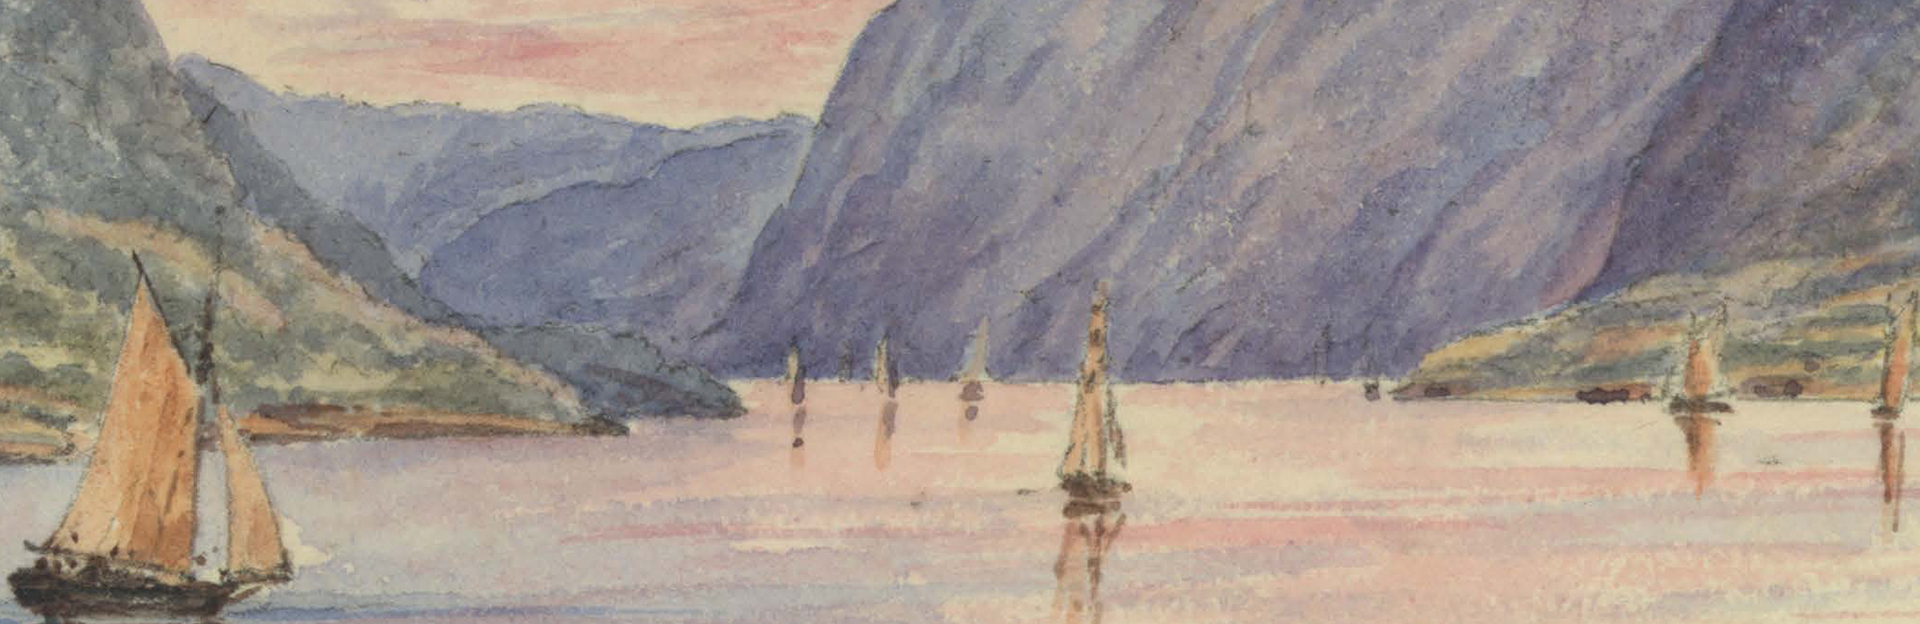 detail of the cover of HRVR 39.2 showing a watercolor image of sailboats sailing south into the Hudson Highlands